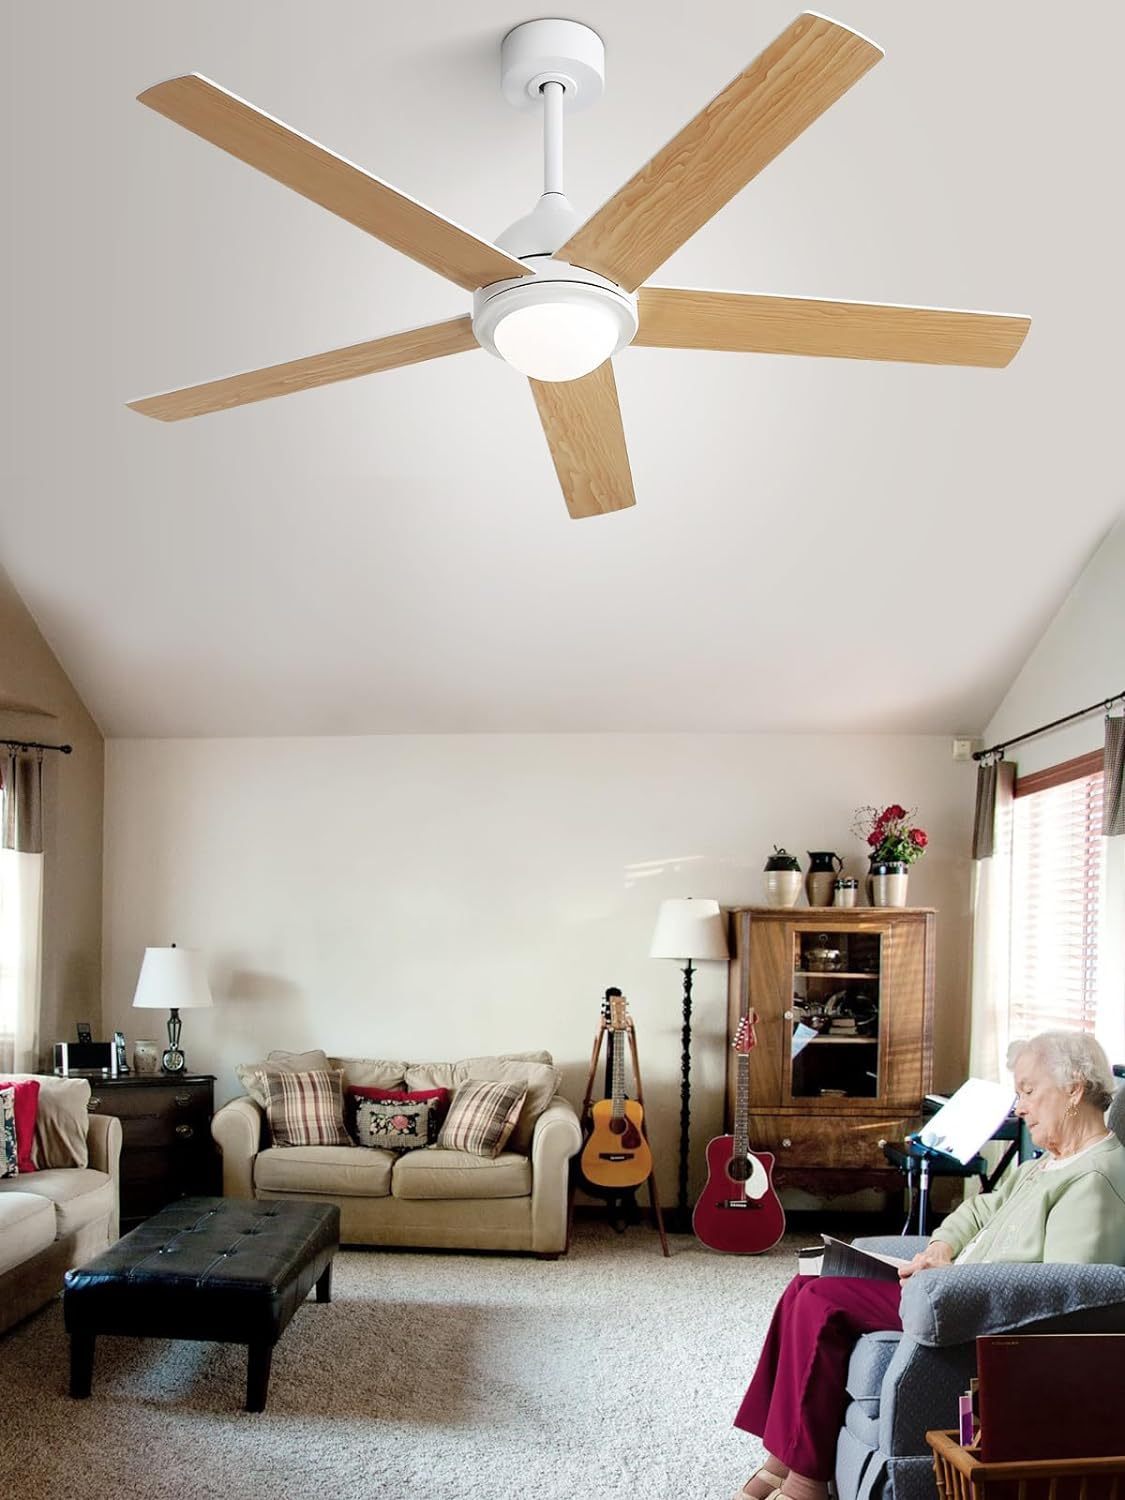 52 Contemporary Ceiling Fan with Remote Control, LED Light, and Reversible Blades